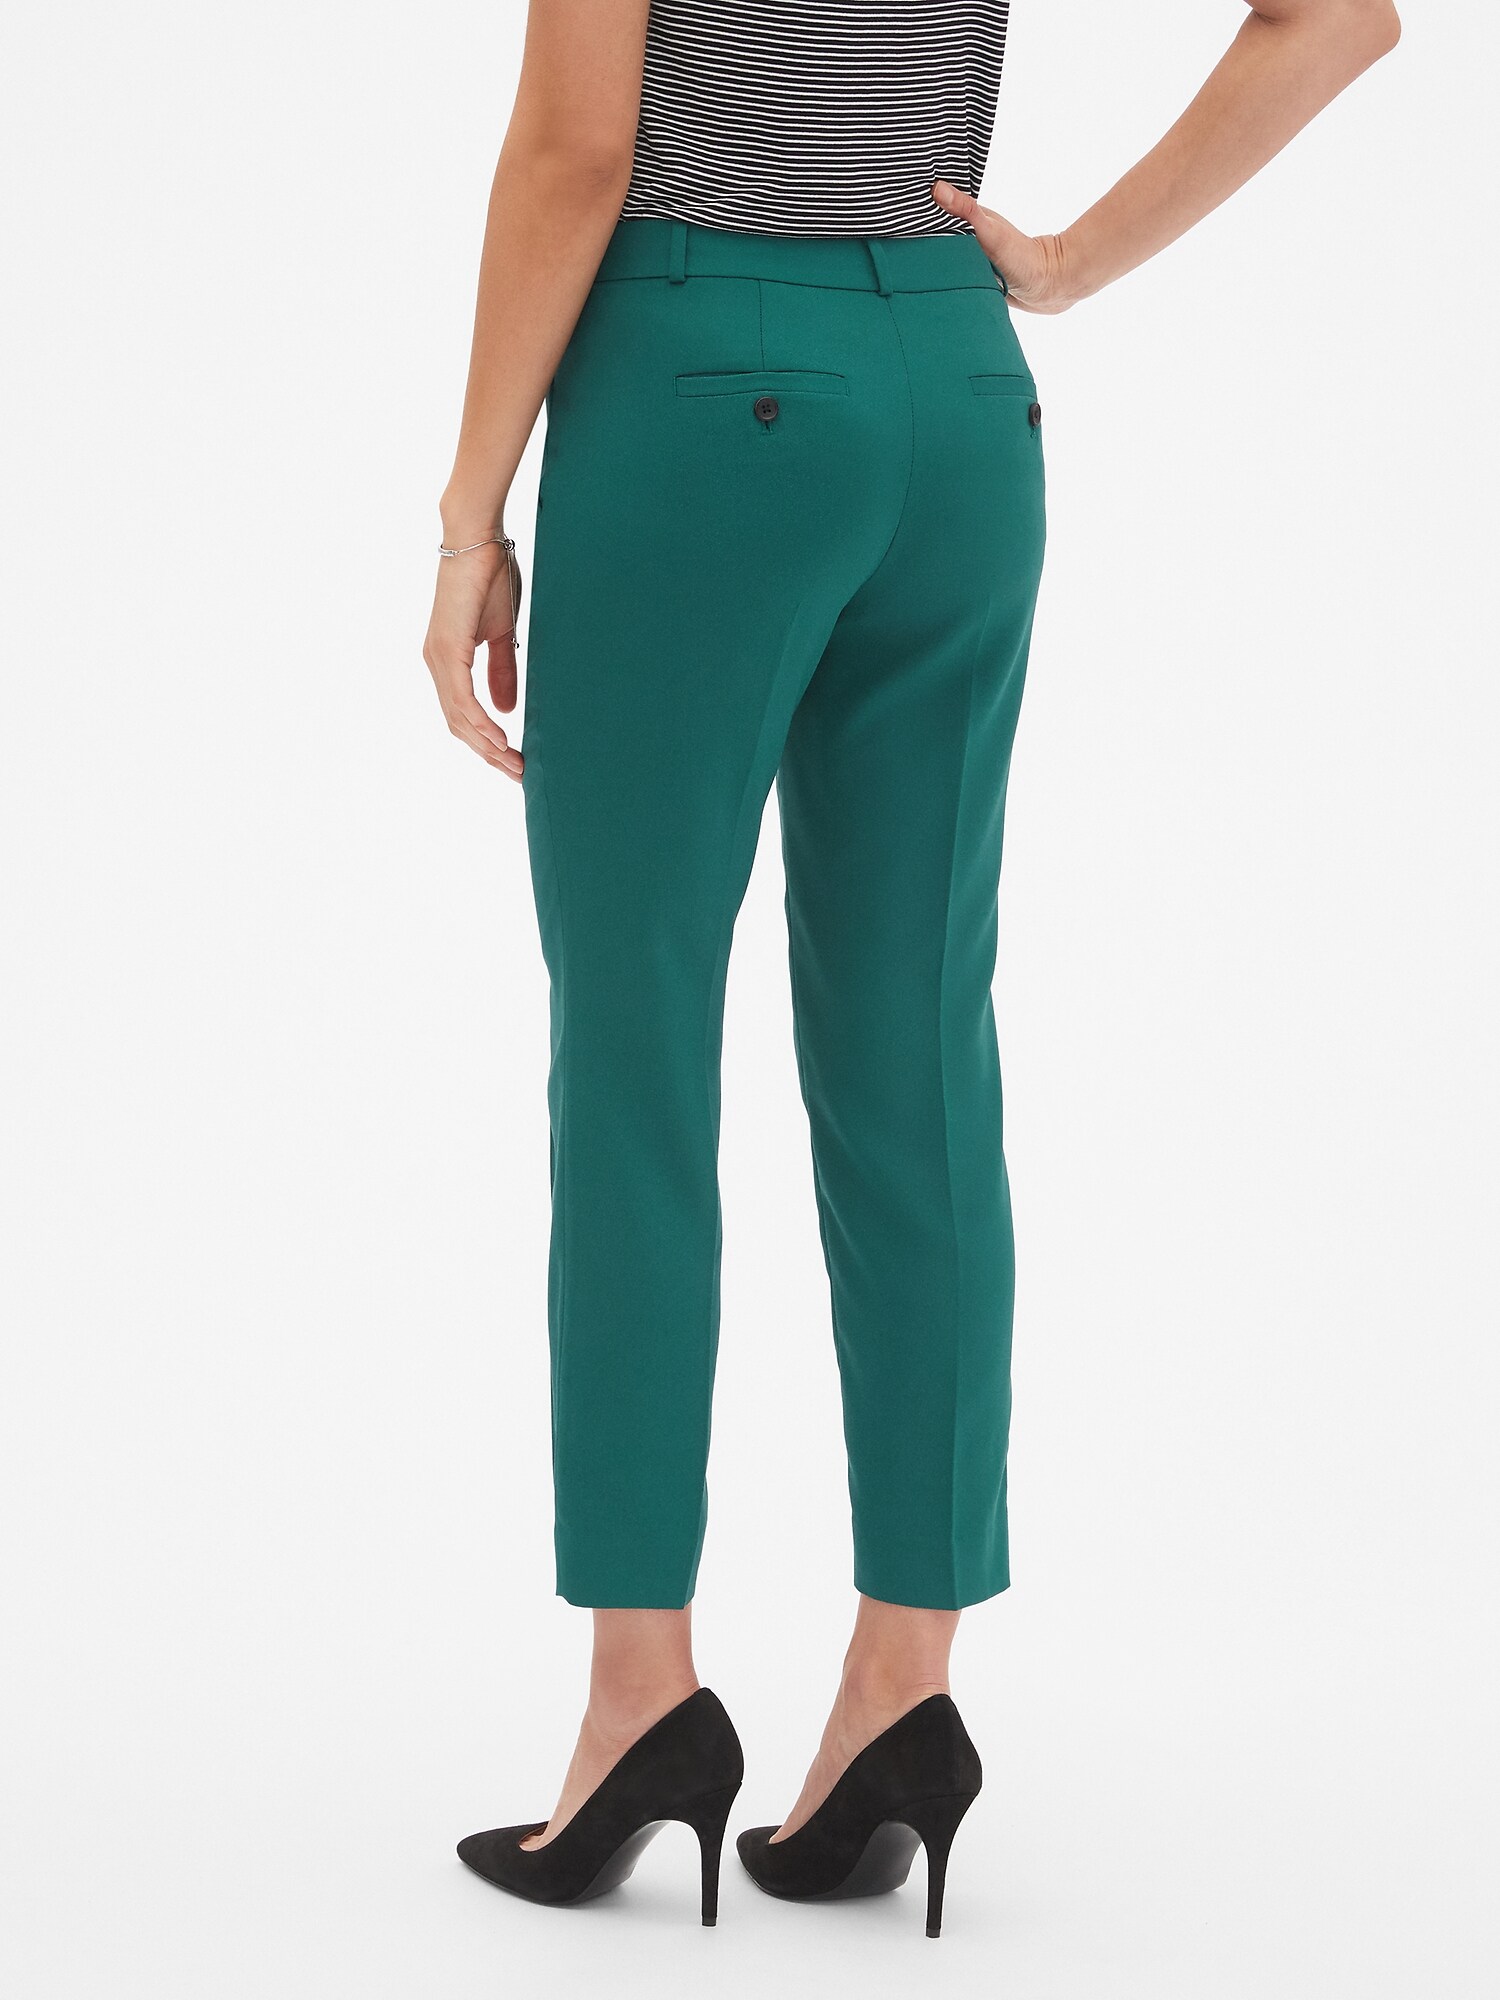 Avery Crepe Tailored Ankle Pant